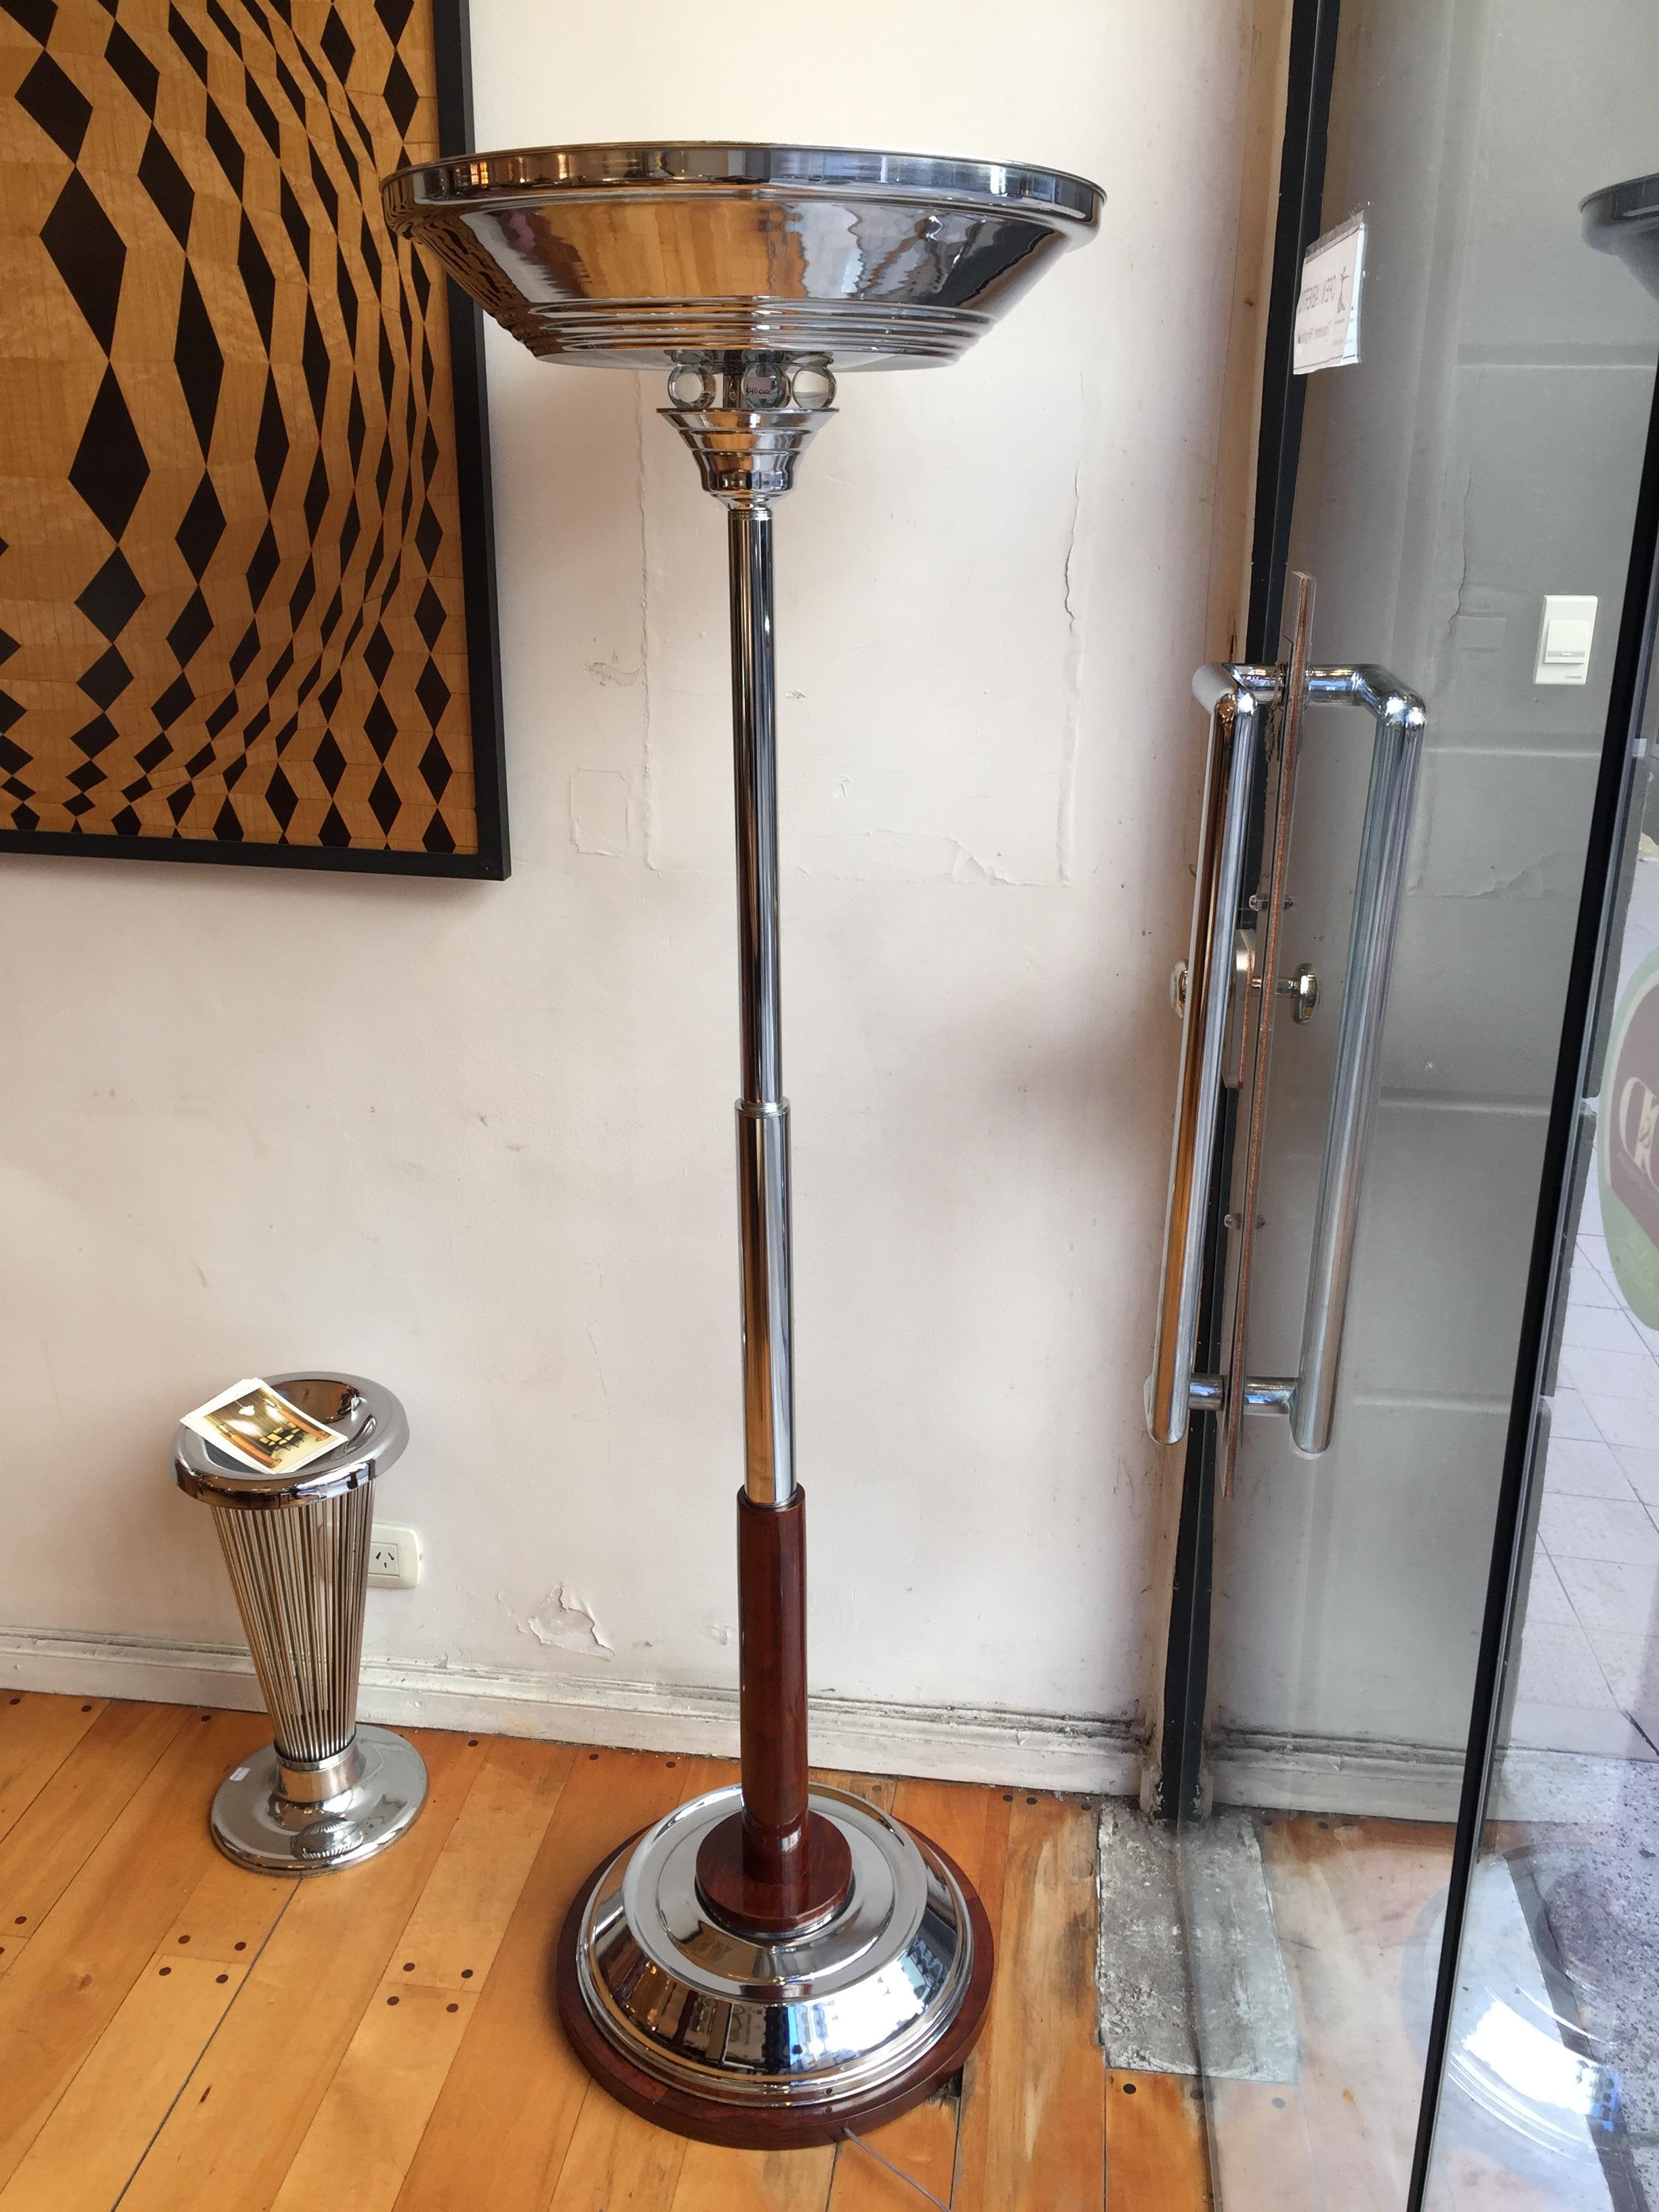 Floor lamp Art Deco

Materials: wood, glass, chrome
France
1930
You want to live in the golden years, those are the floor lamps that your project needs.
We have specialized in the sale of Art Deco and Art Nouveau styles since 1982.
Pushing the